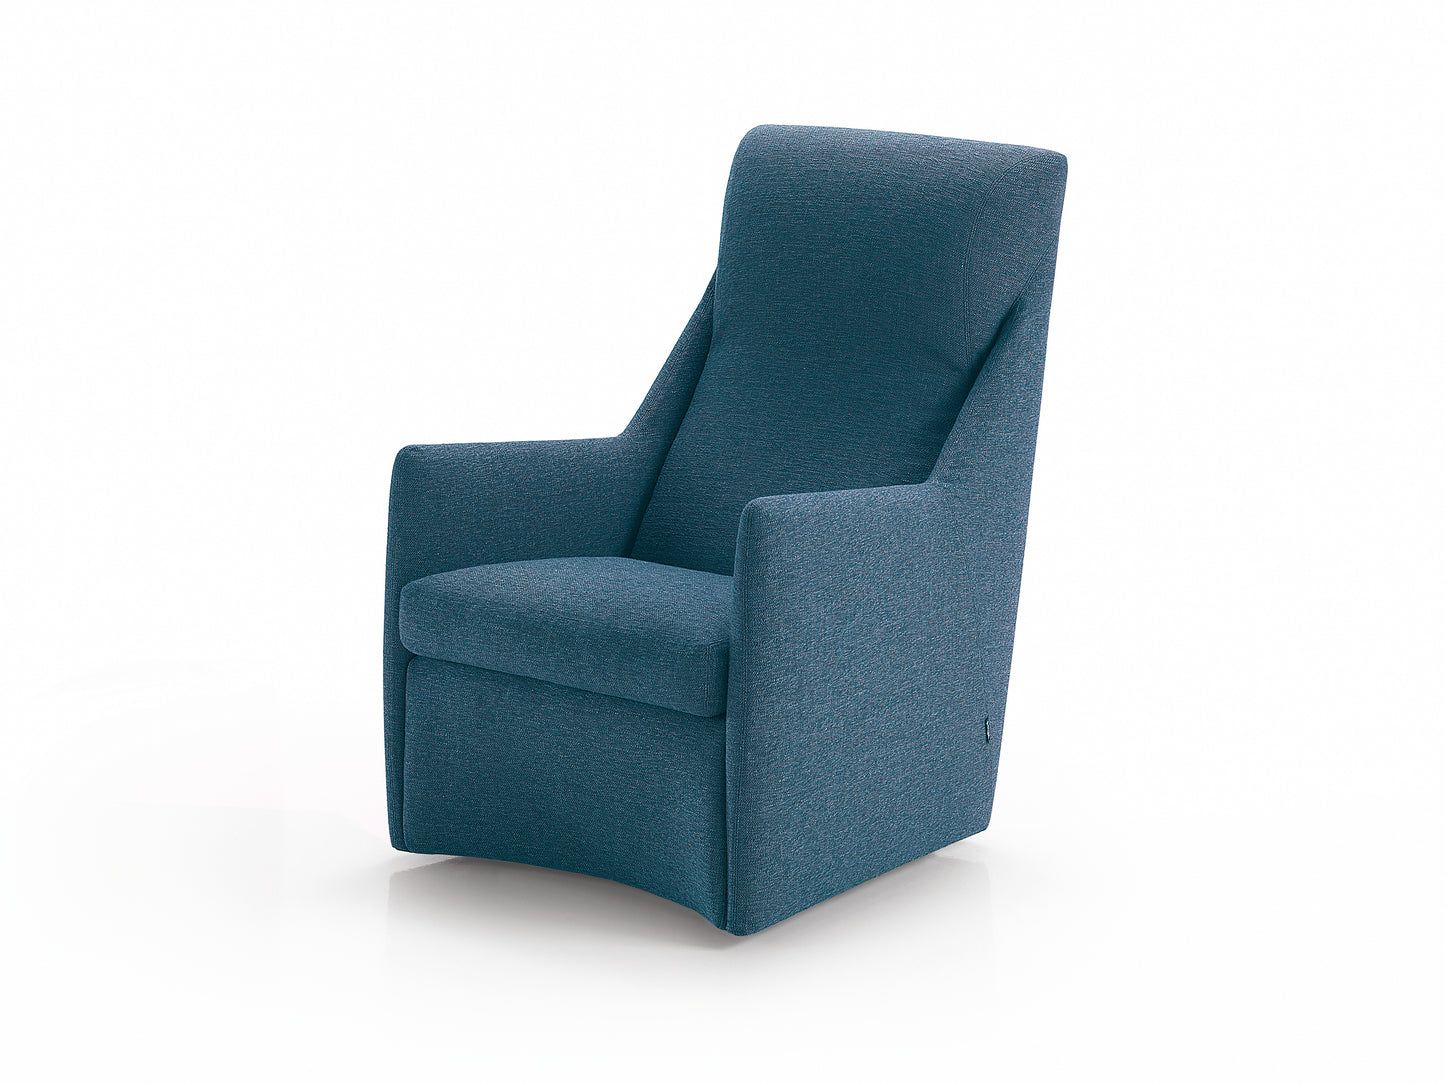 Small footprint armchair with high back.